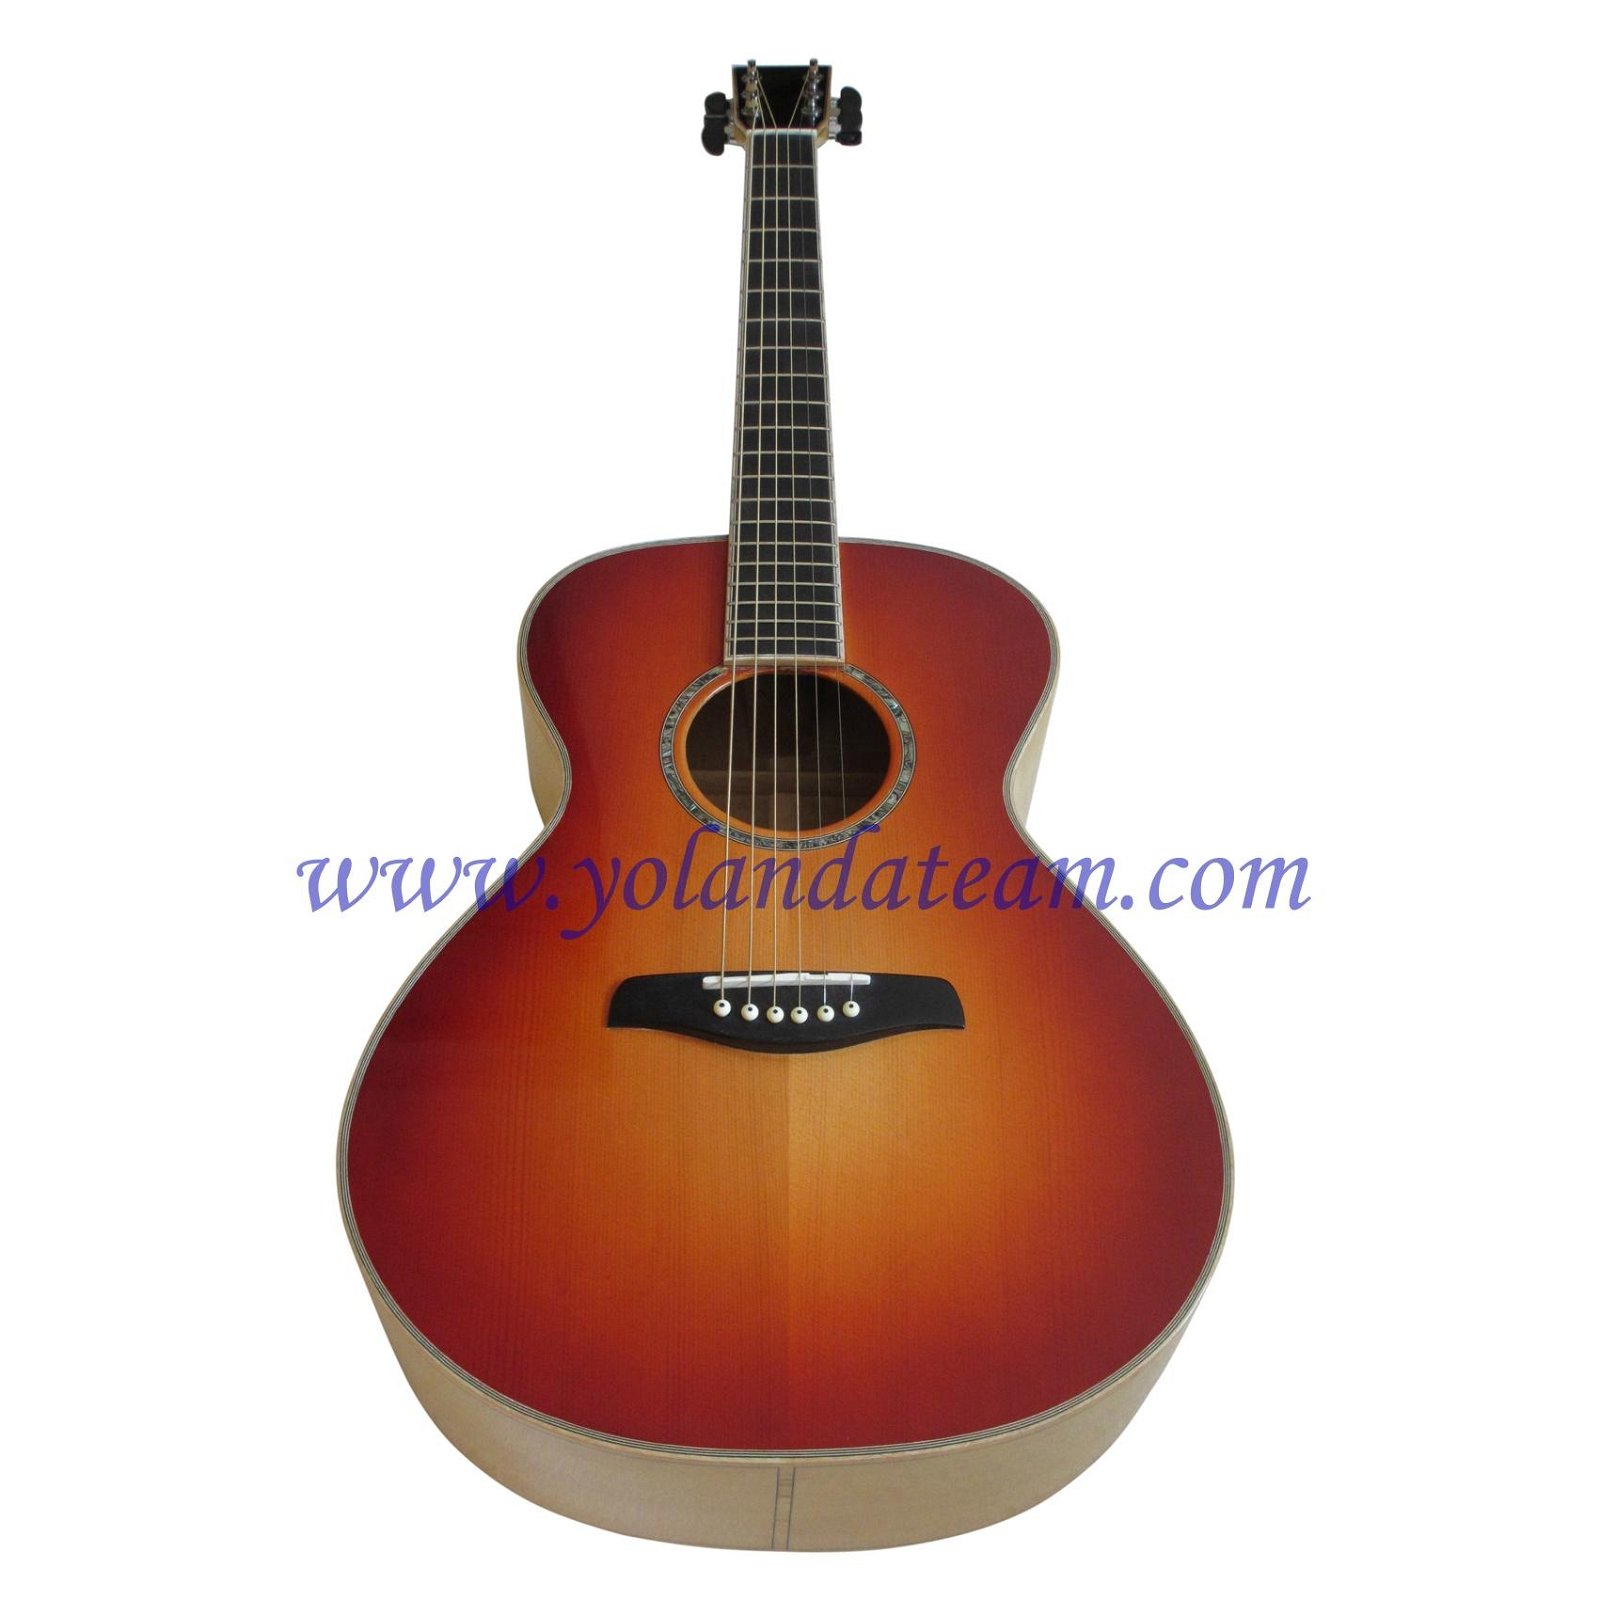 15inch acoustic guitar 5